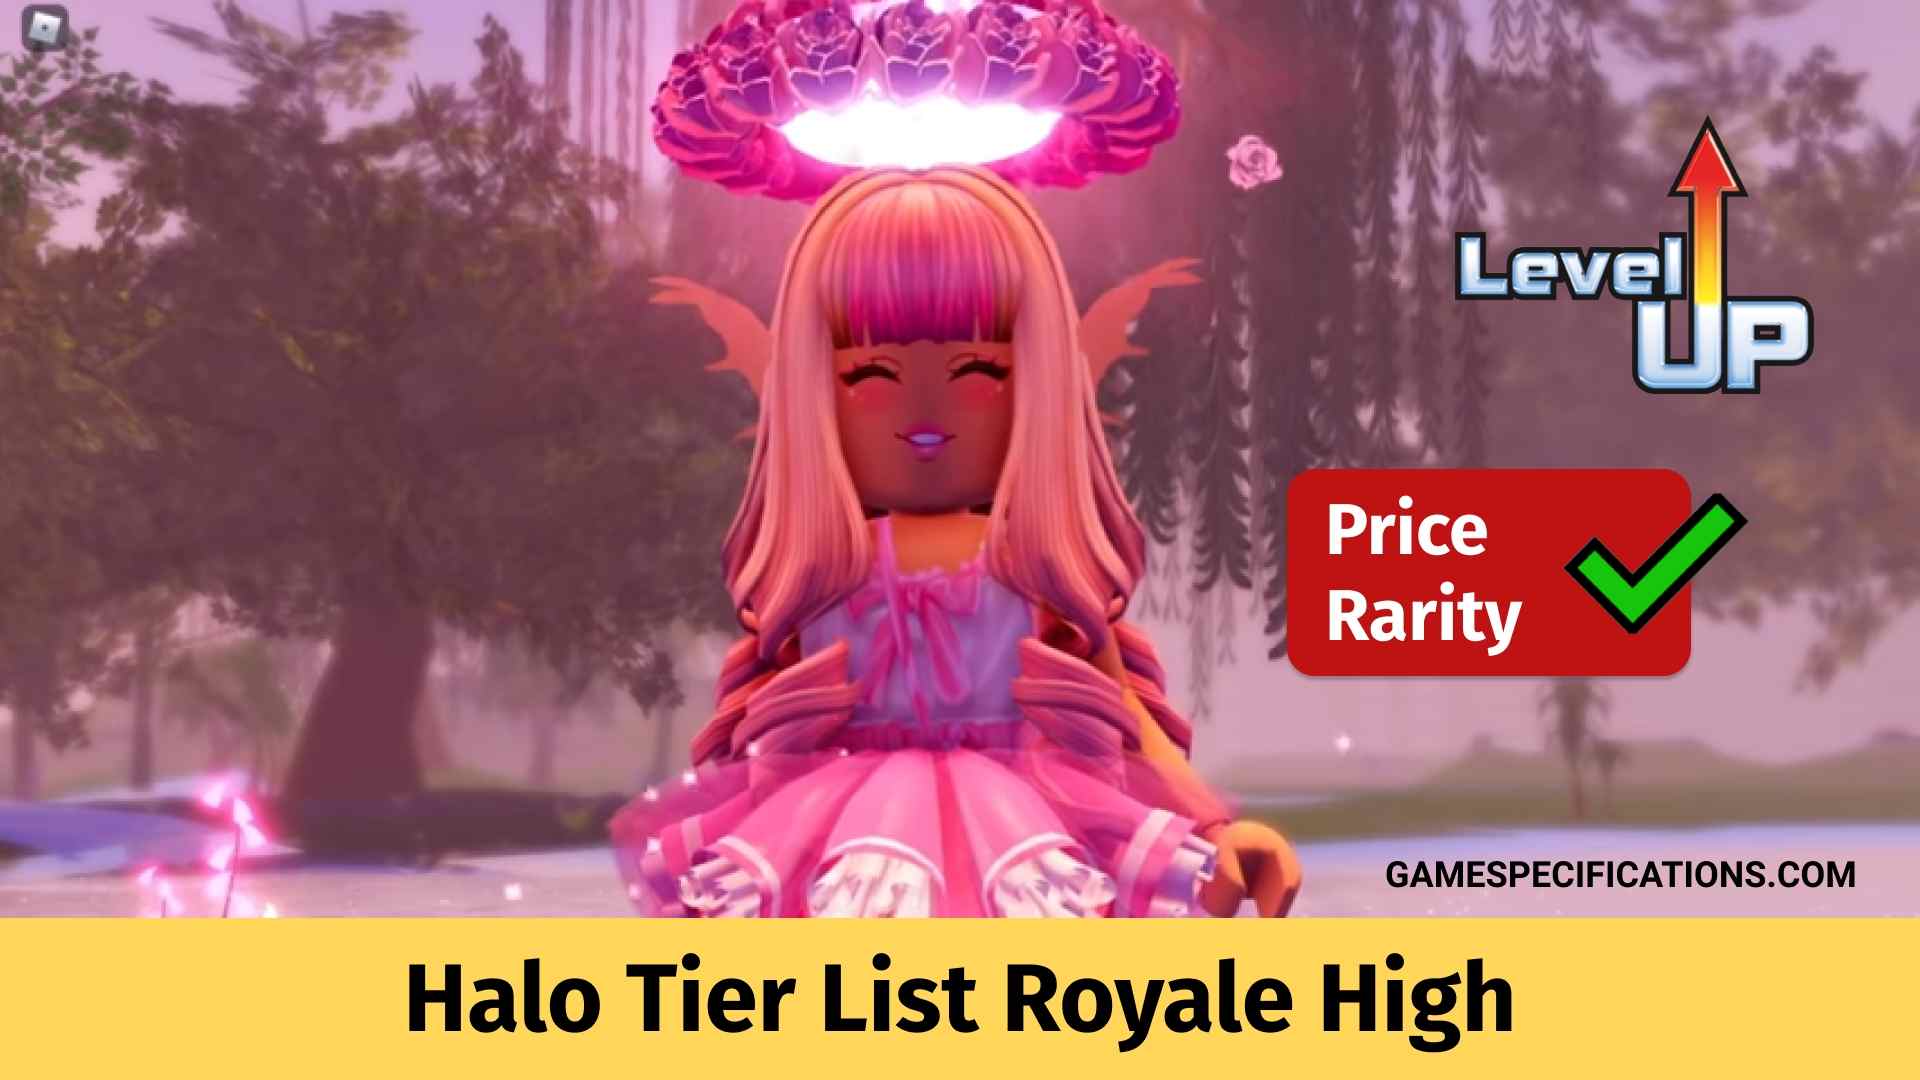 Top Halo Tier List Royale High Based On Rarity 2021 Game Specifications - roblox royale high st patrick halo